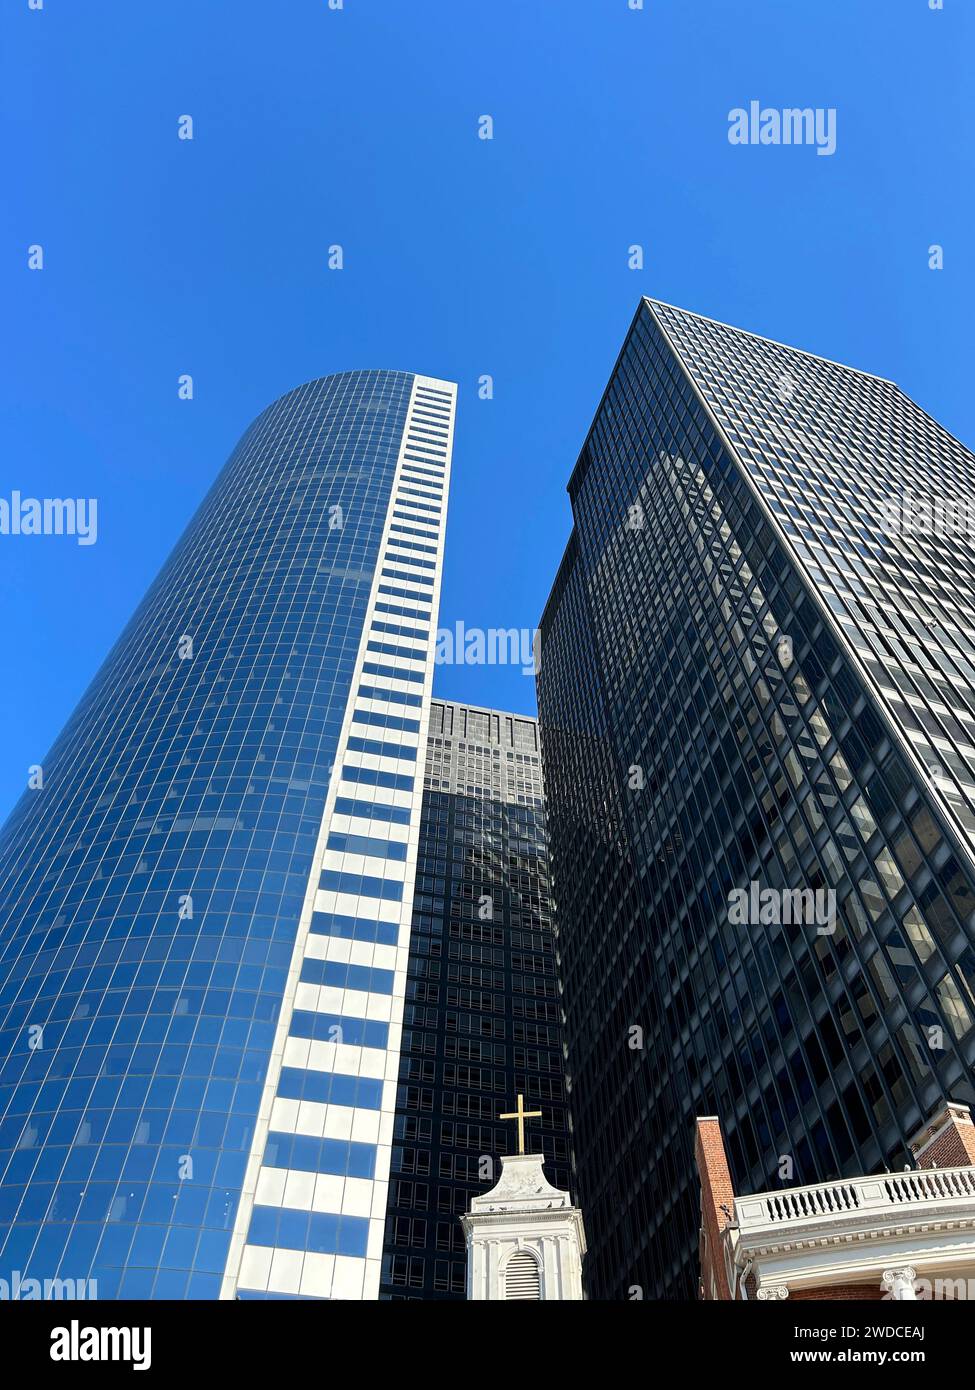 Low angle view of two modern skyscrapers rising above Church of Our Lady of the Holy Rosary, Shrine of St. Elizabeth Ann Bayley Seton, Financial District, New York City, New York, USA Stock Photo